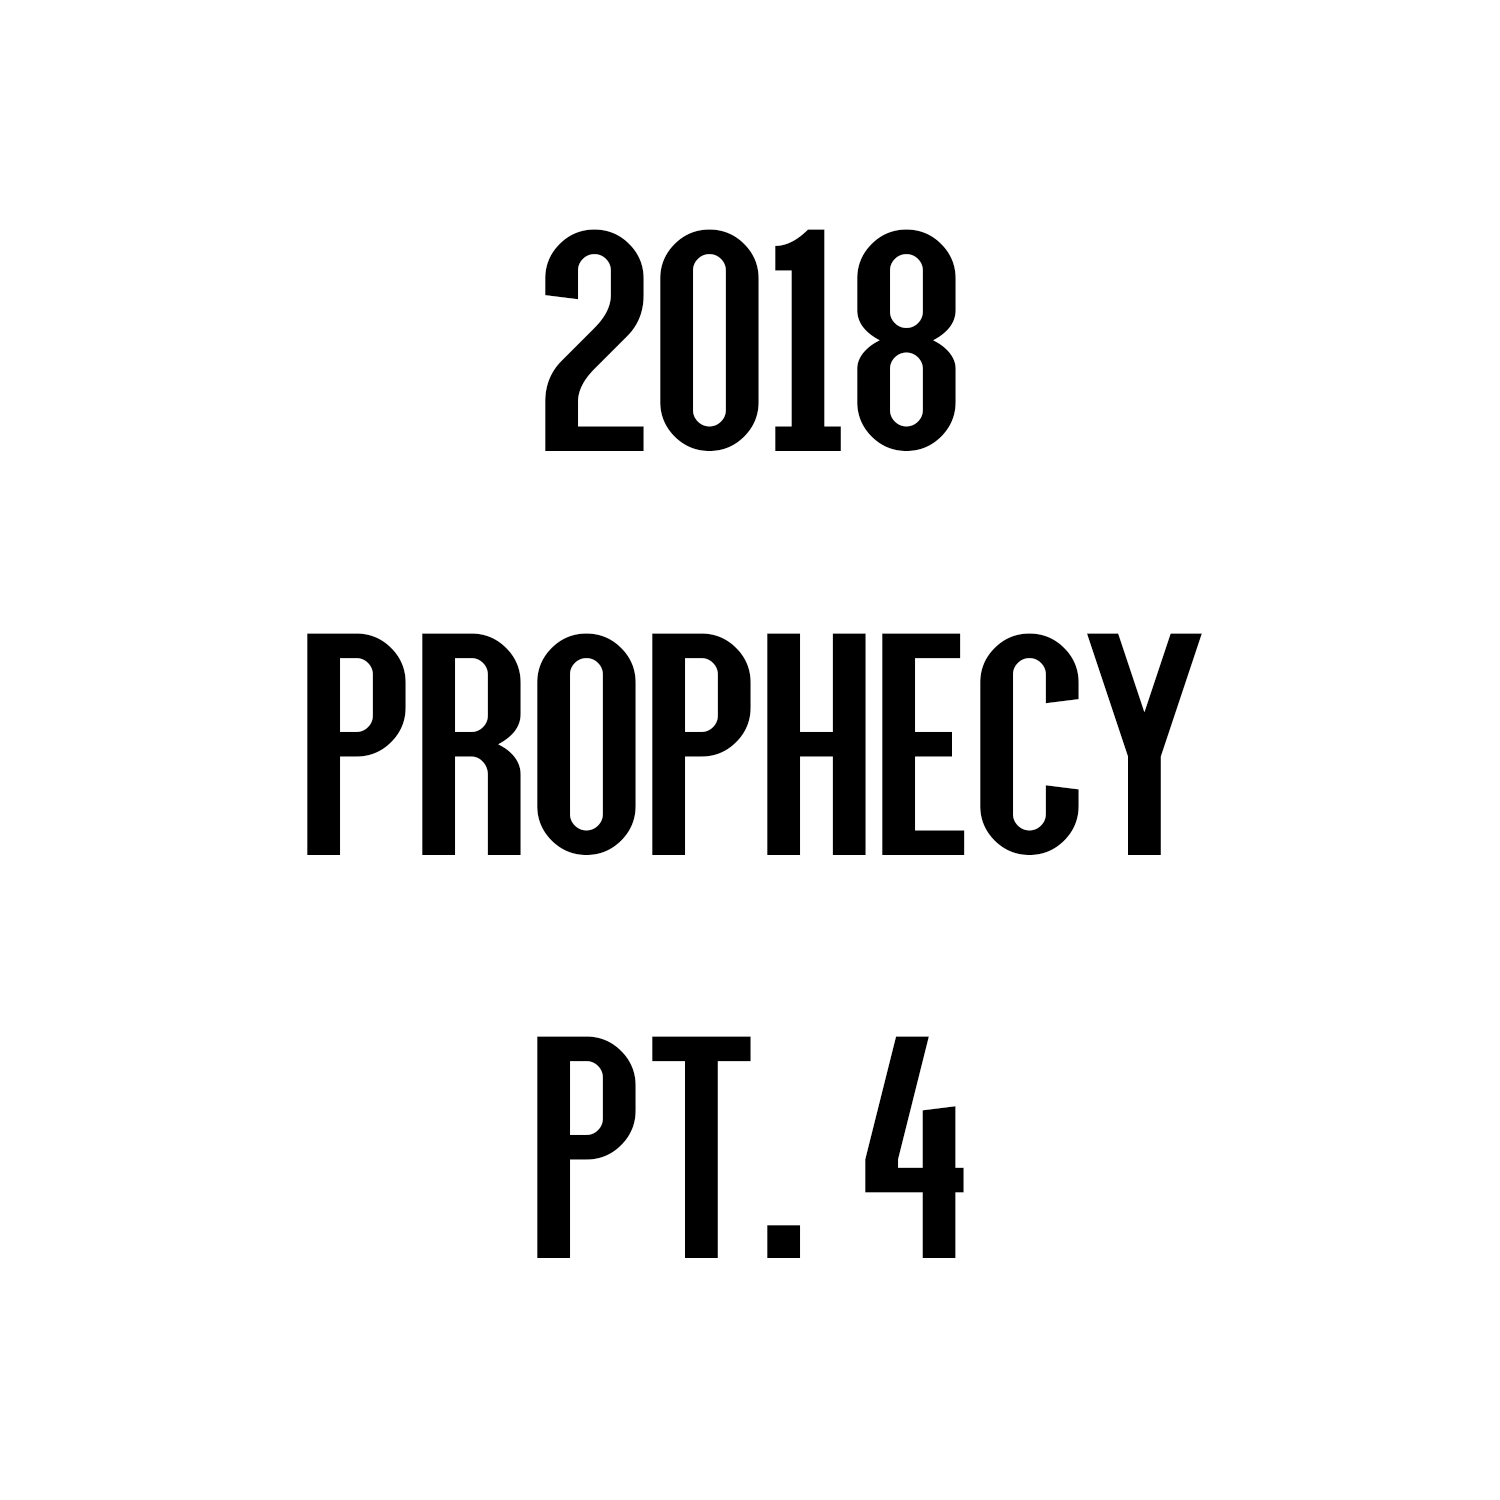 Johnny’s Prophetic Word for the New Year | Part 4 of 4